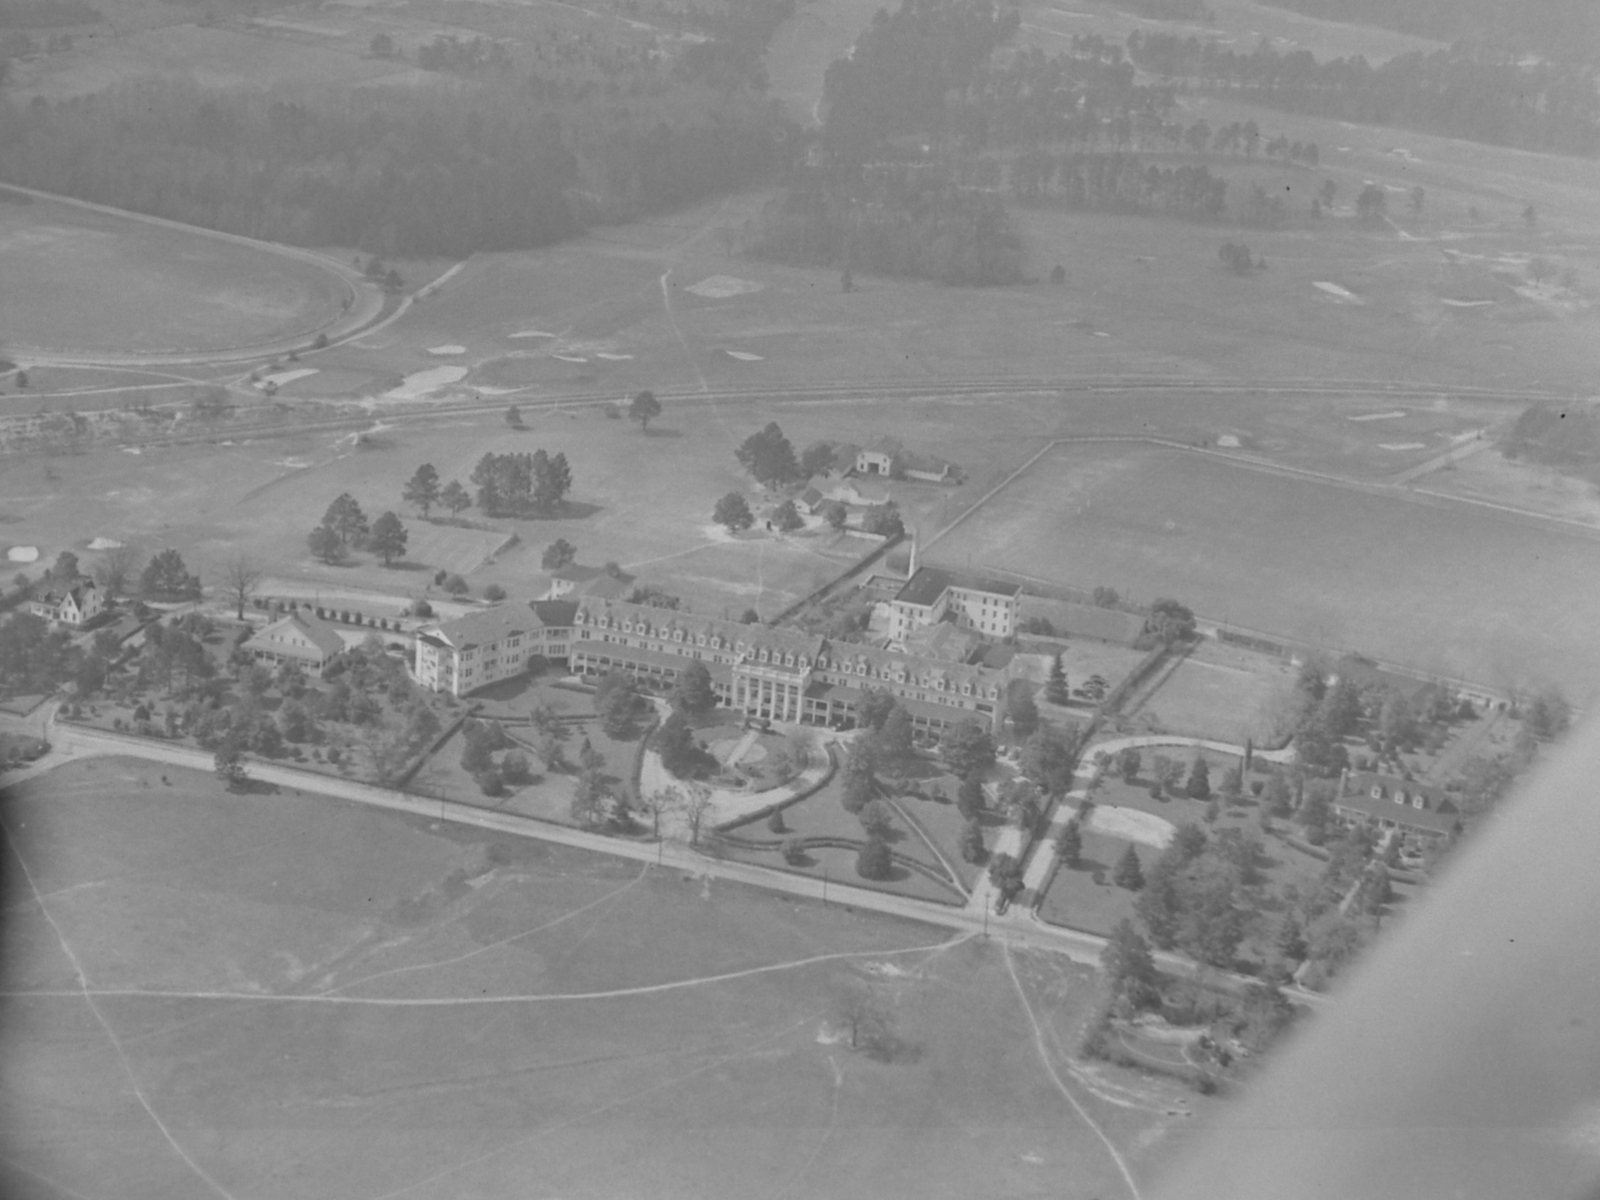 ANOTHER AERIAL VIEW OF THE HOTEL